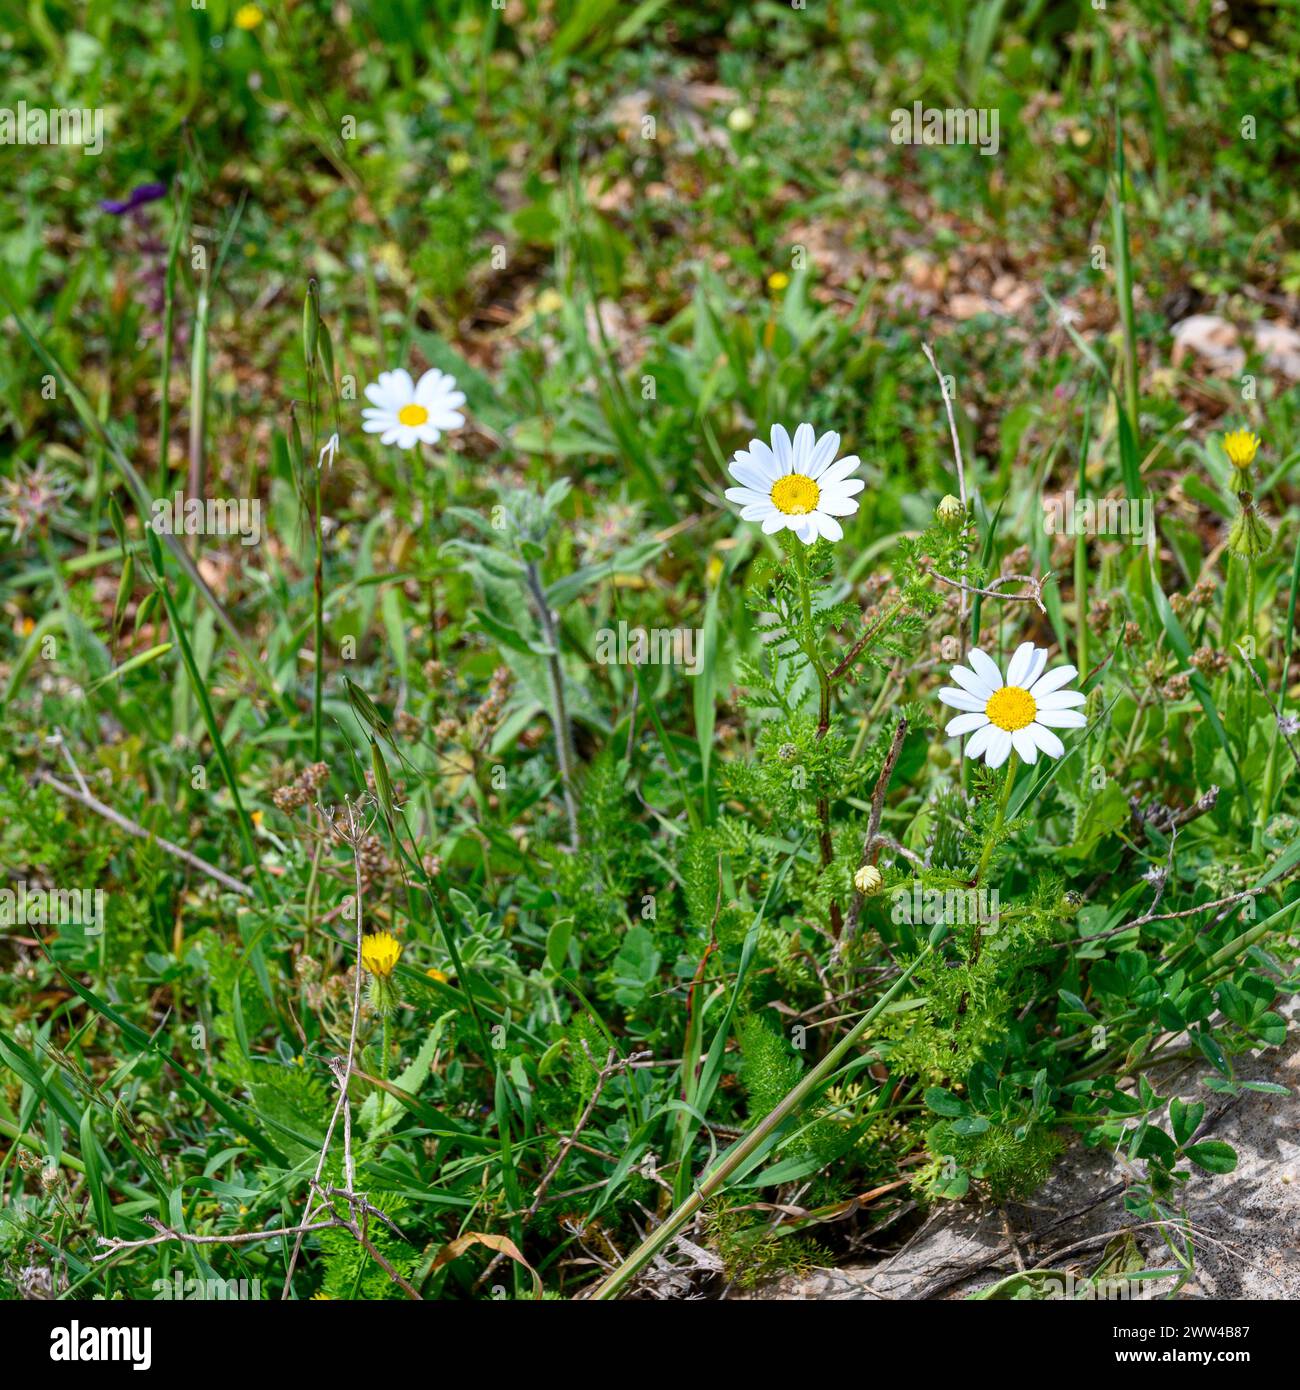 Anthemis palaestina Israel's camomile or Common camomile or Palestinian camomile flowering in Jezreel Valley, Israel in March Stock Photo